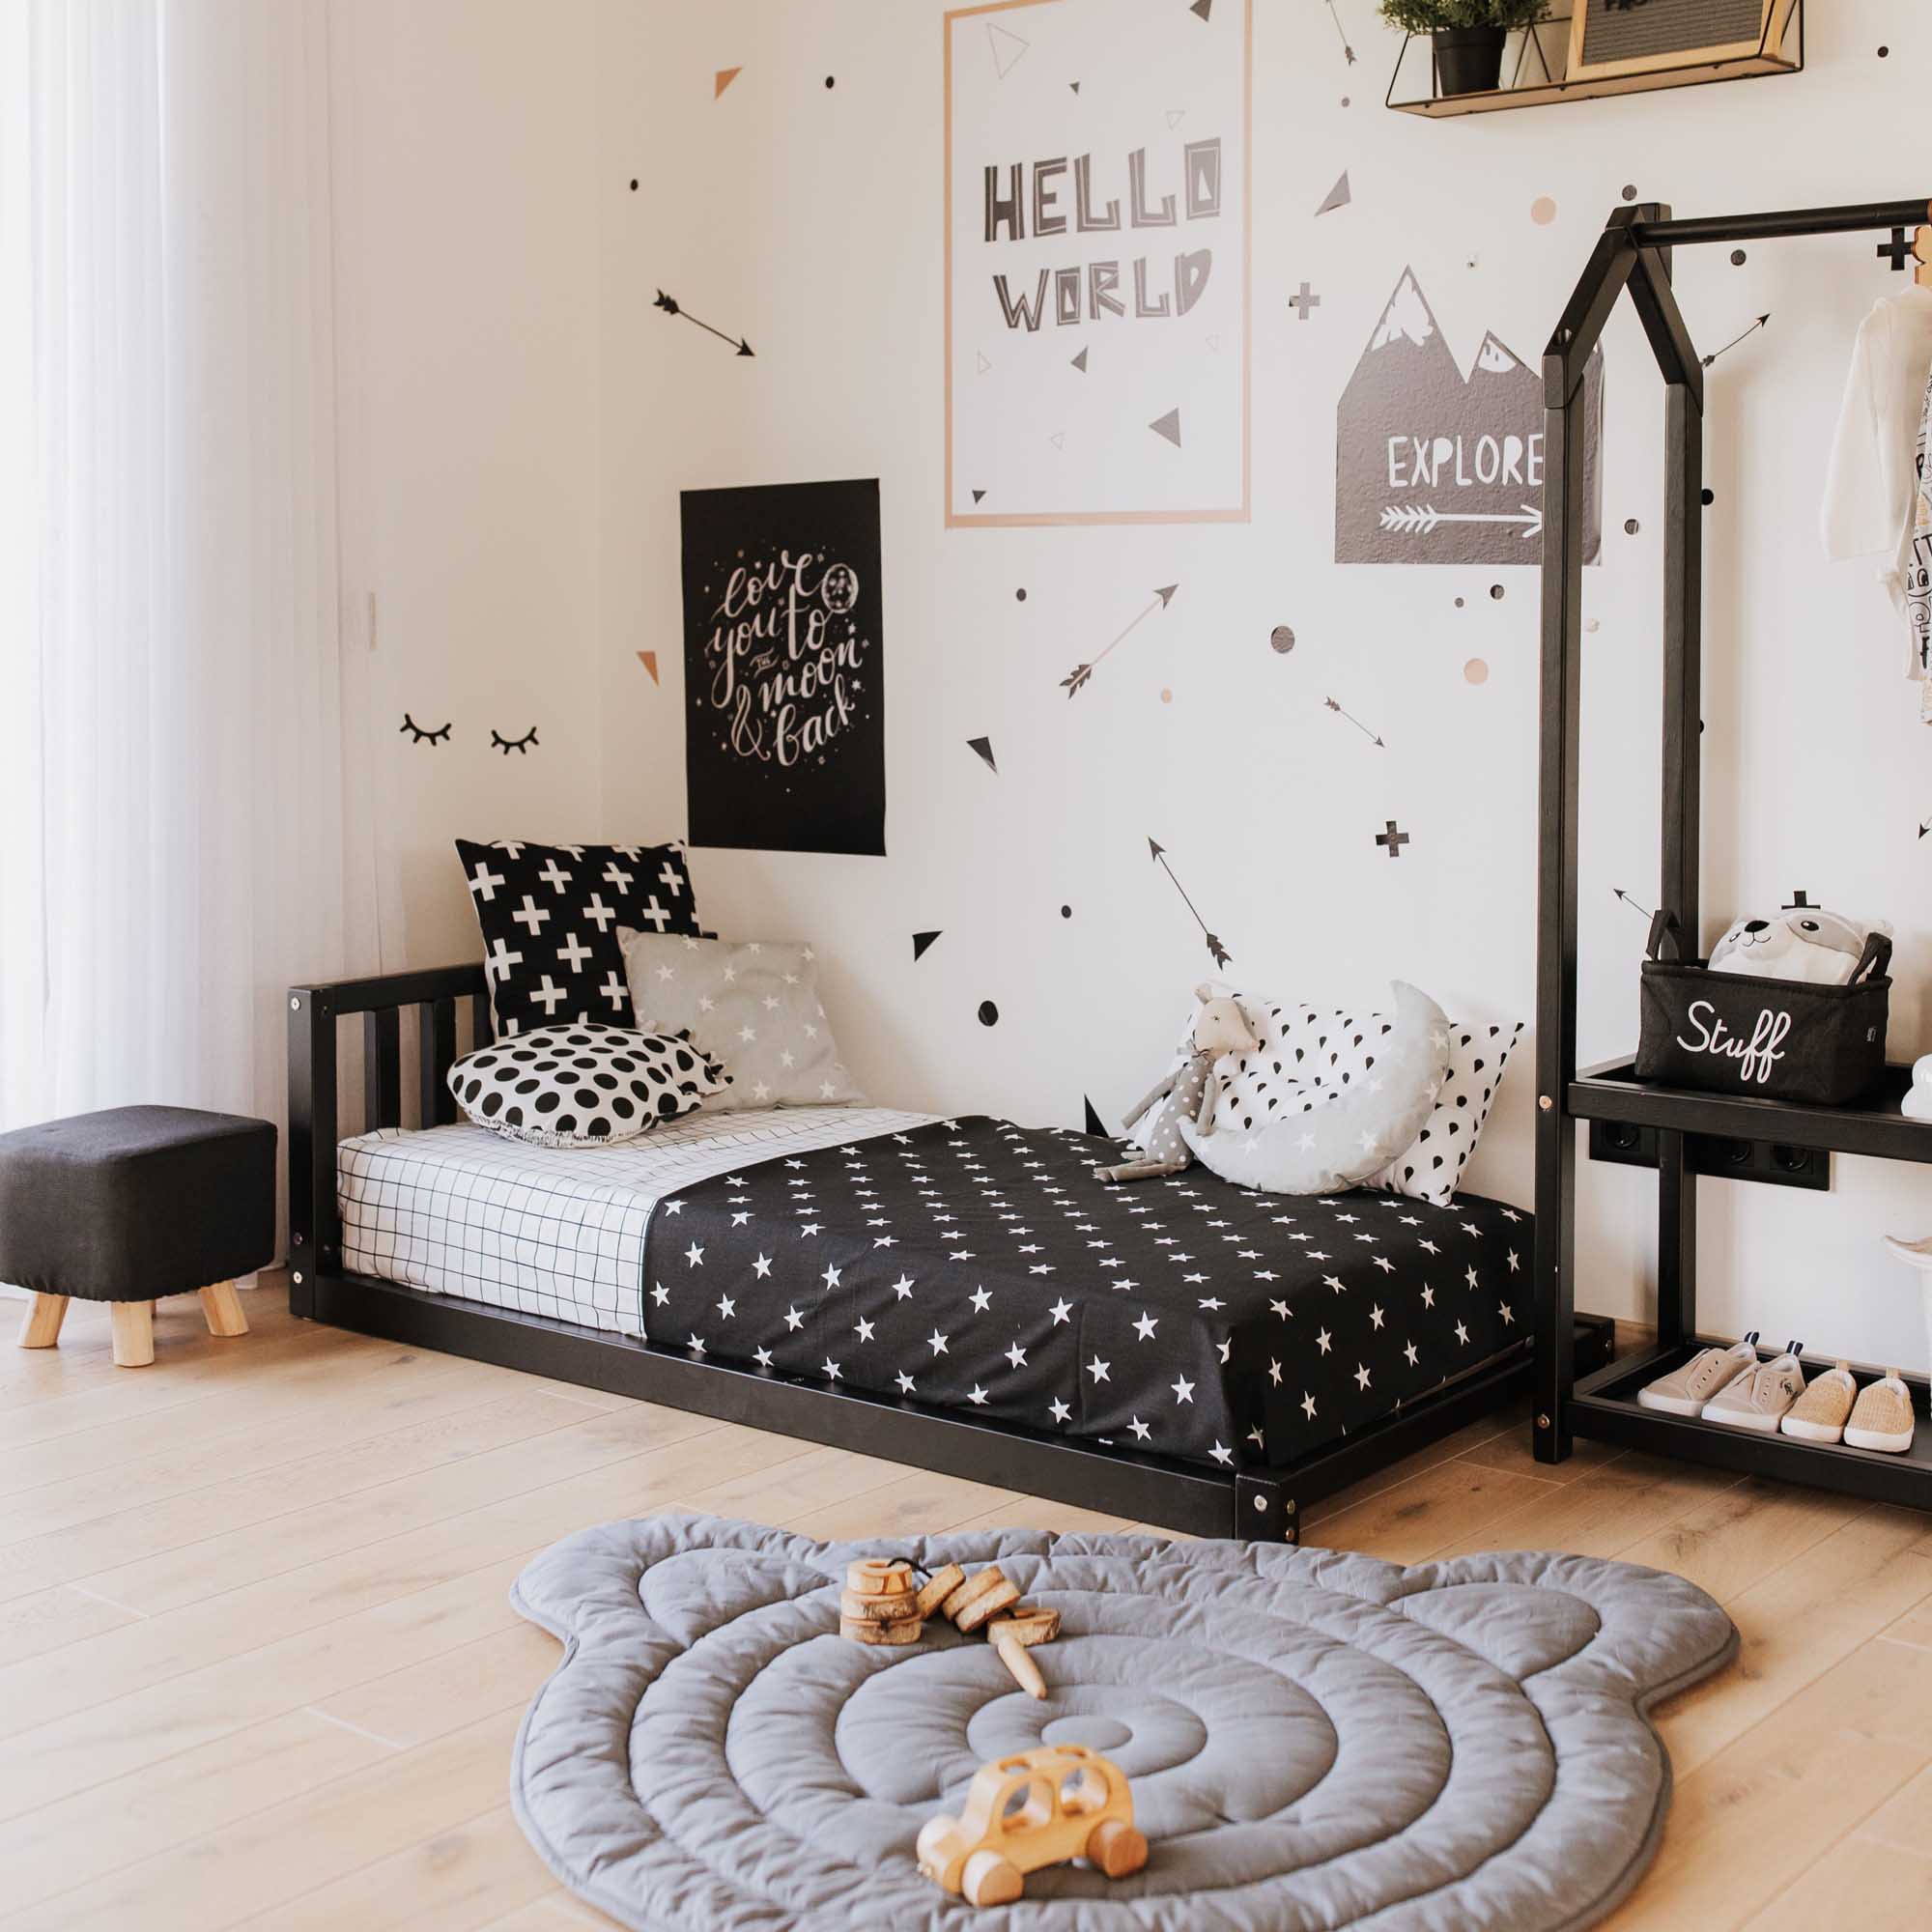 A black and white children's room with polka dots.